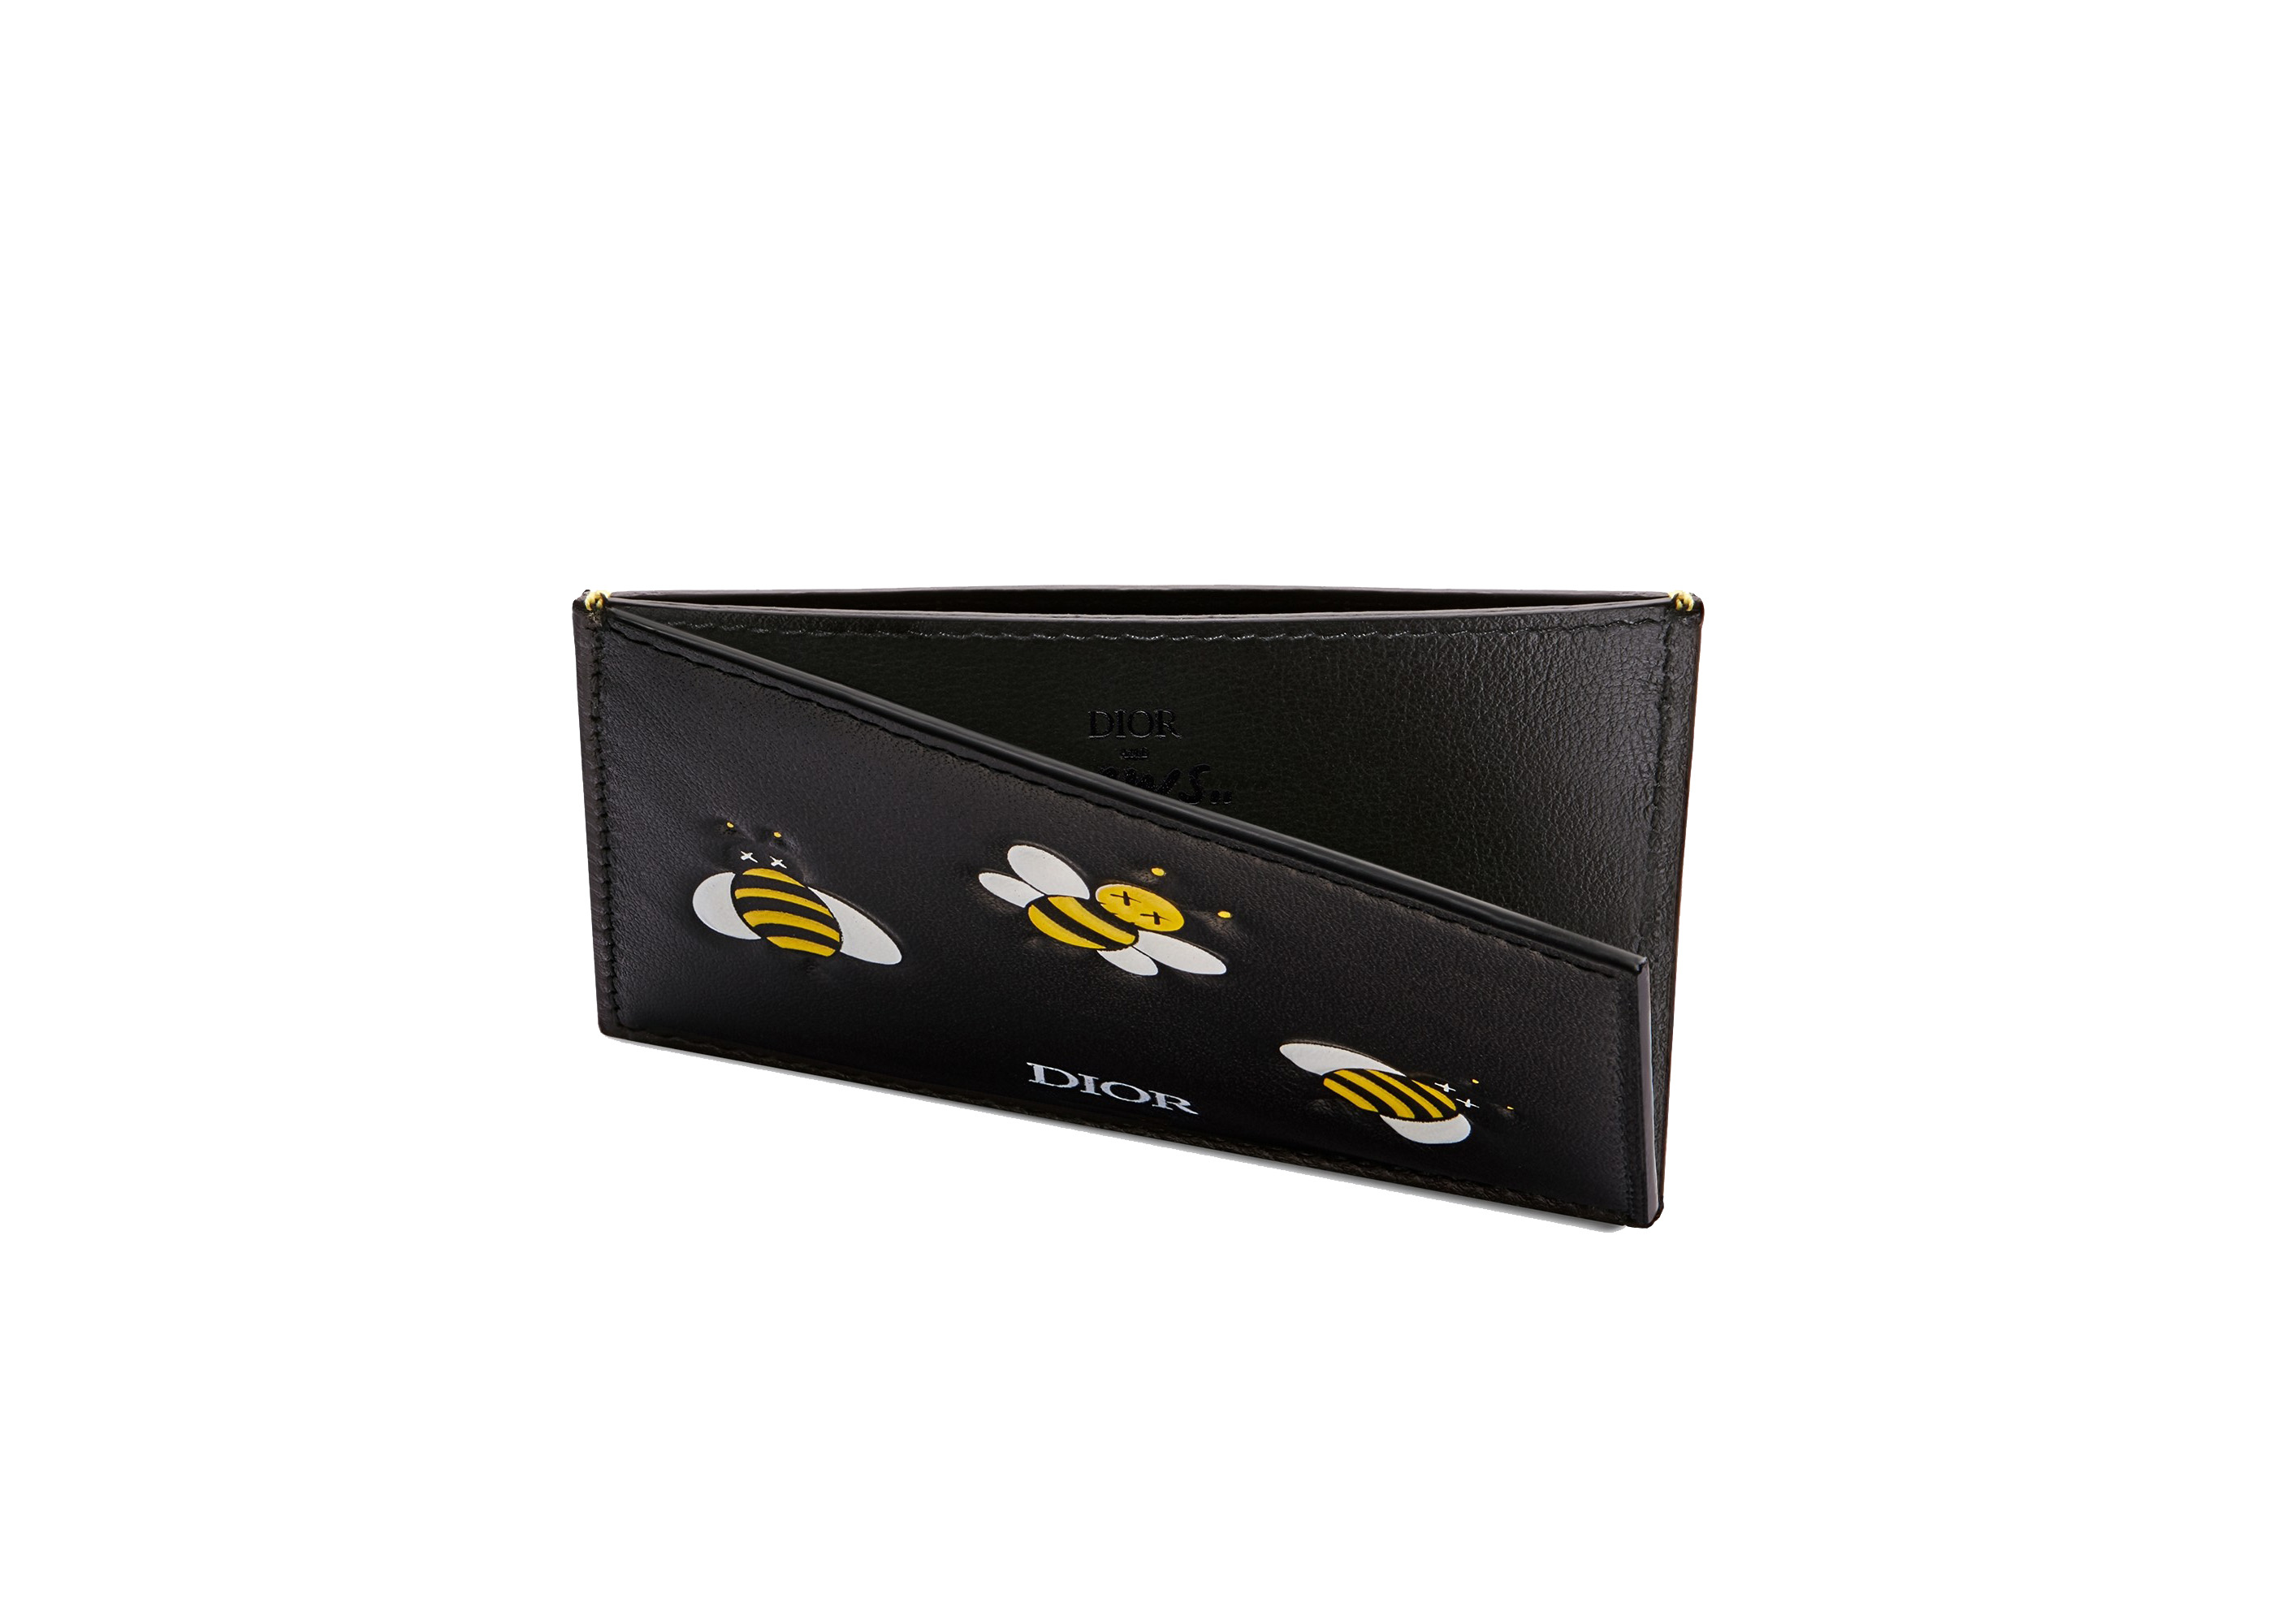 Dior x Kaws Card Holder with Pocket Yellow Bees Black in Calfskin - JP